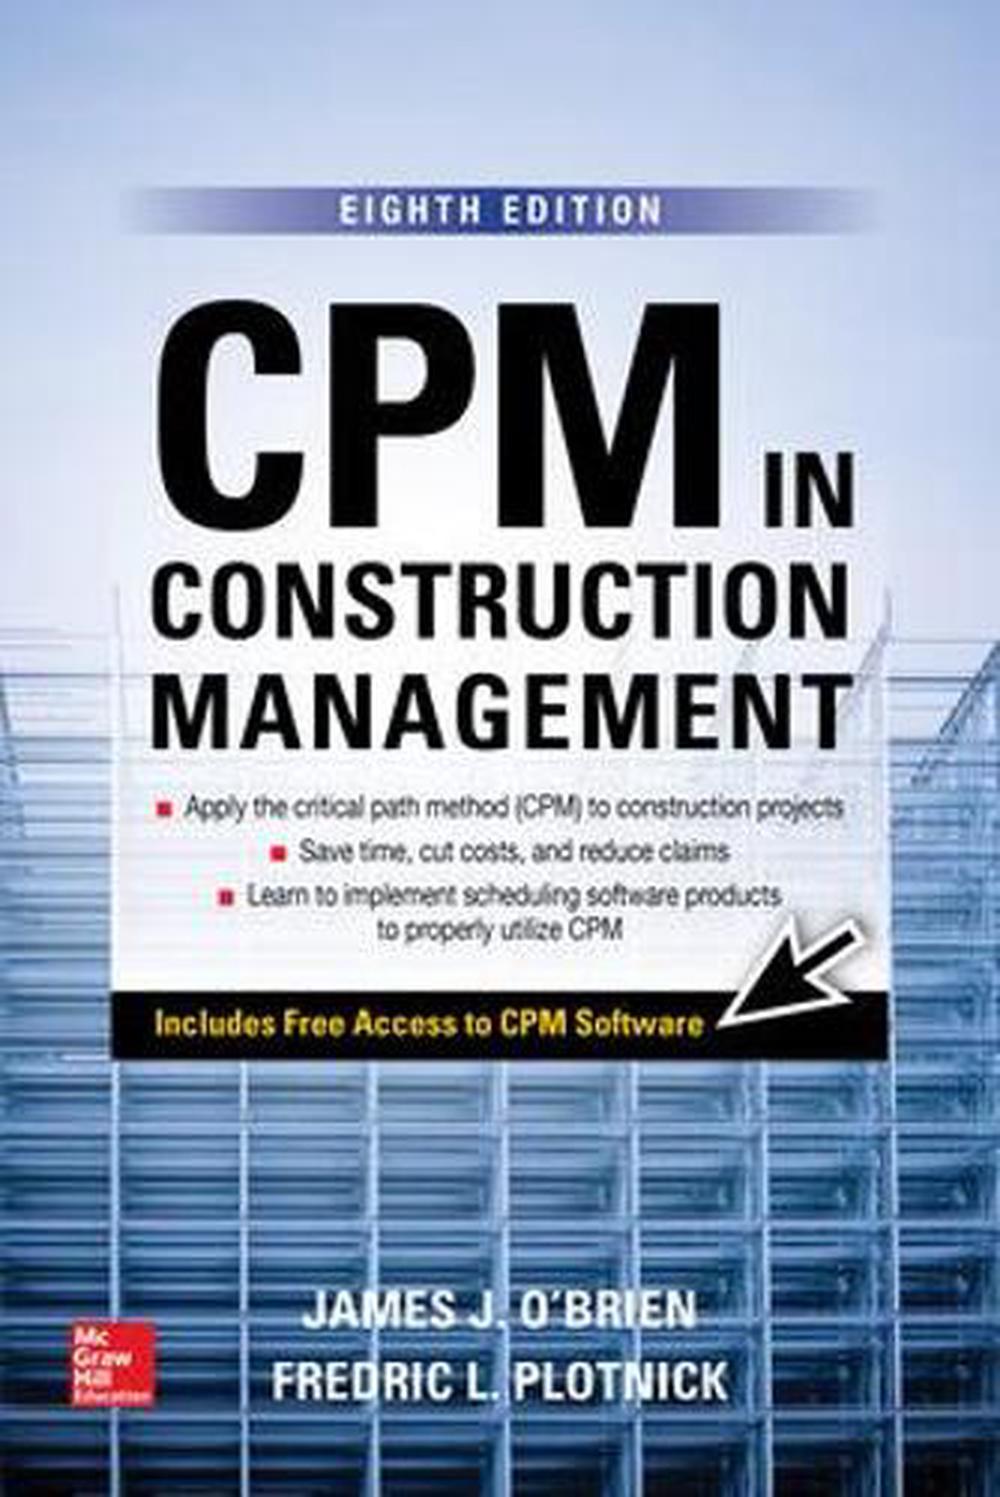 CPM in Construction Management, Eighth Edition by James O'Brien